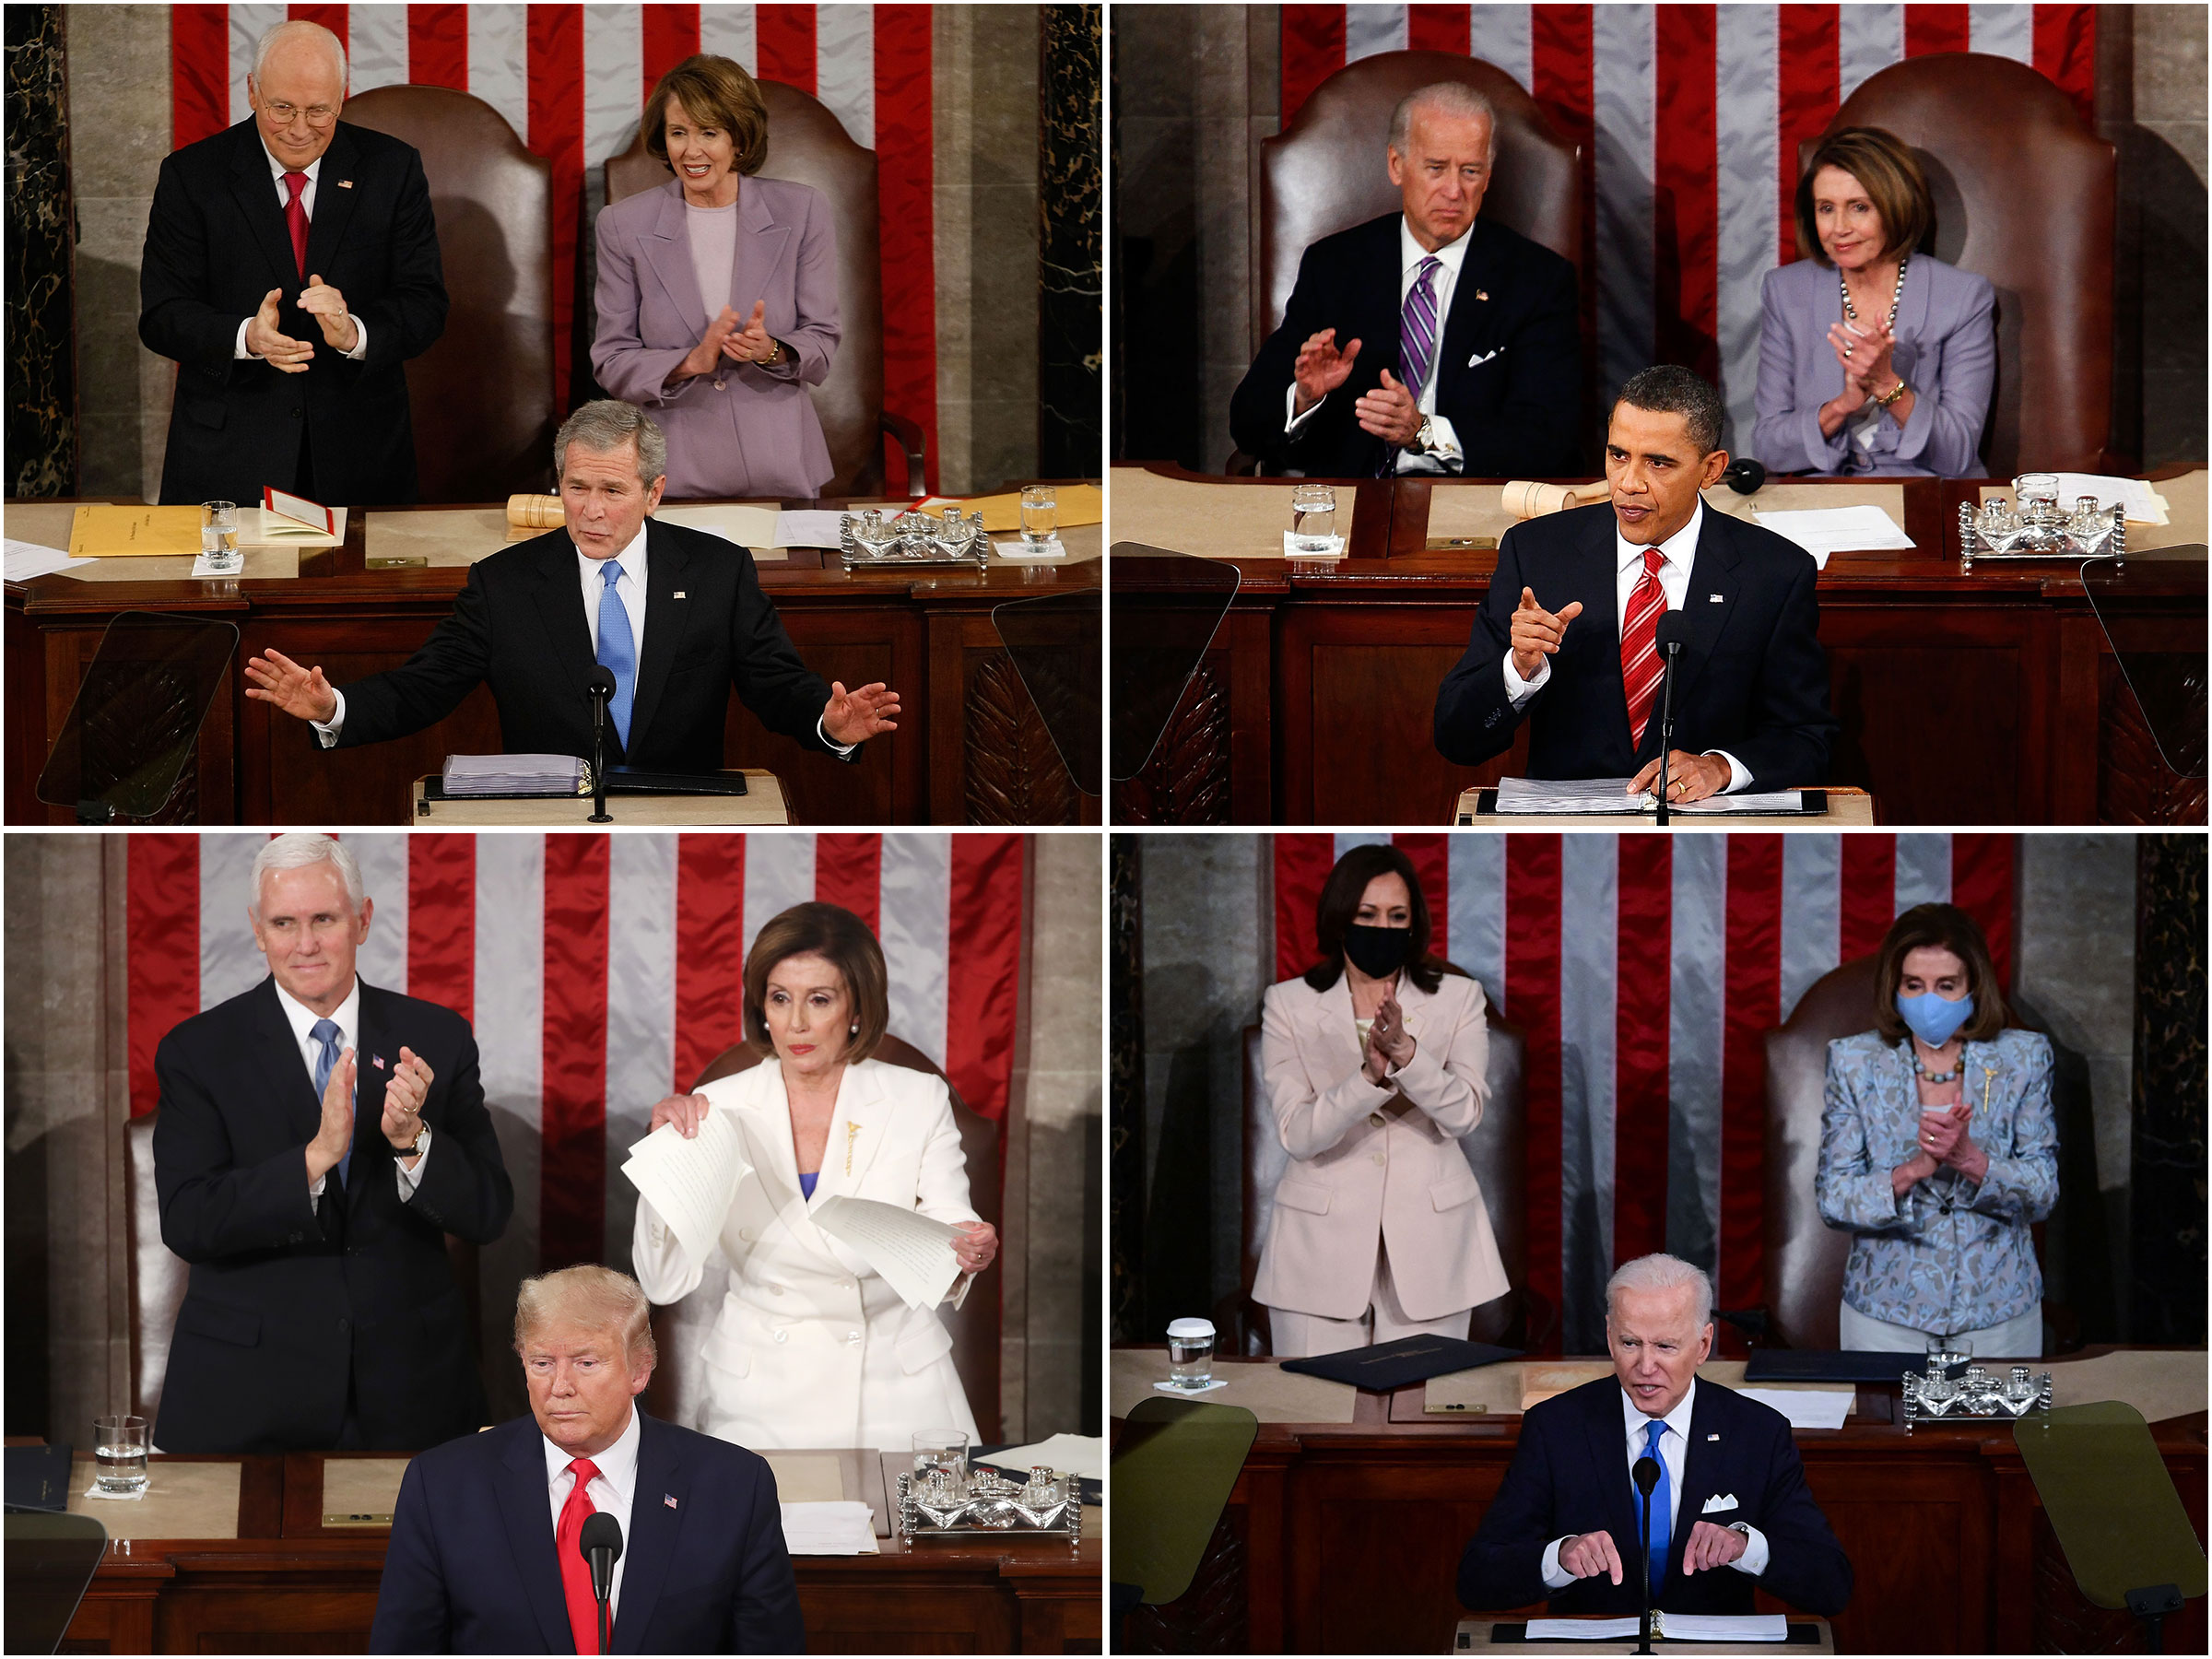 Four images of Nancy Pelosi seated behind Presidents George Bush, Barack Obama, Donald Trump, and Joe Biden during State of the Union speeches